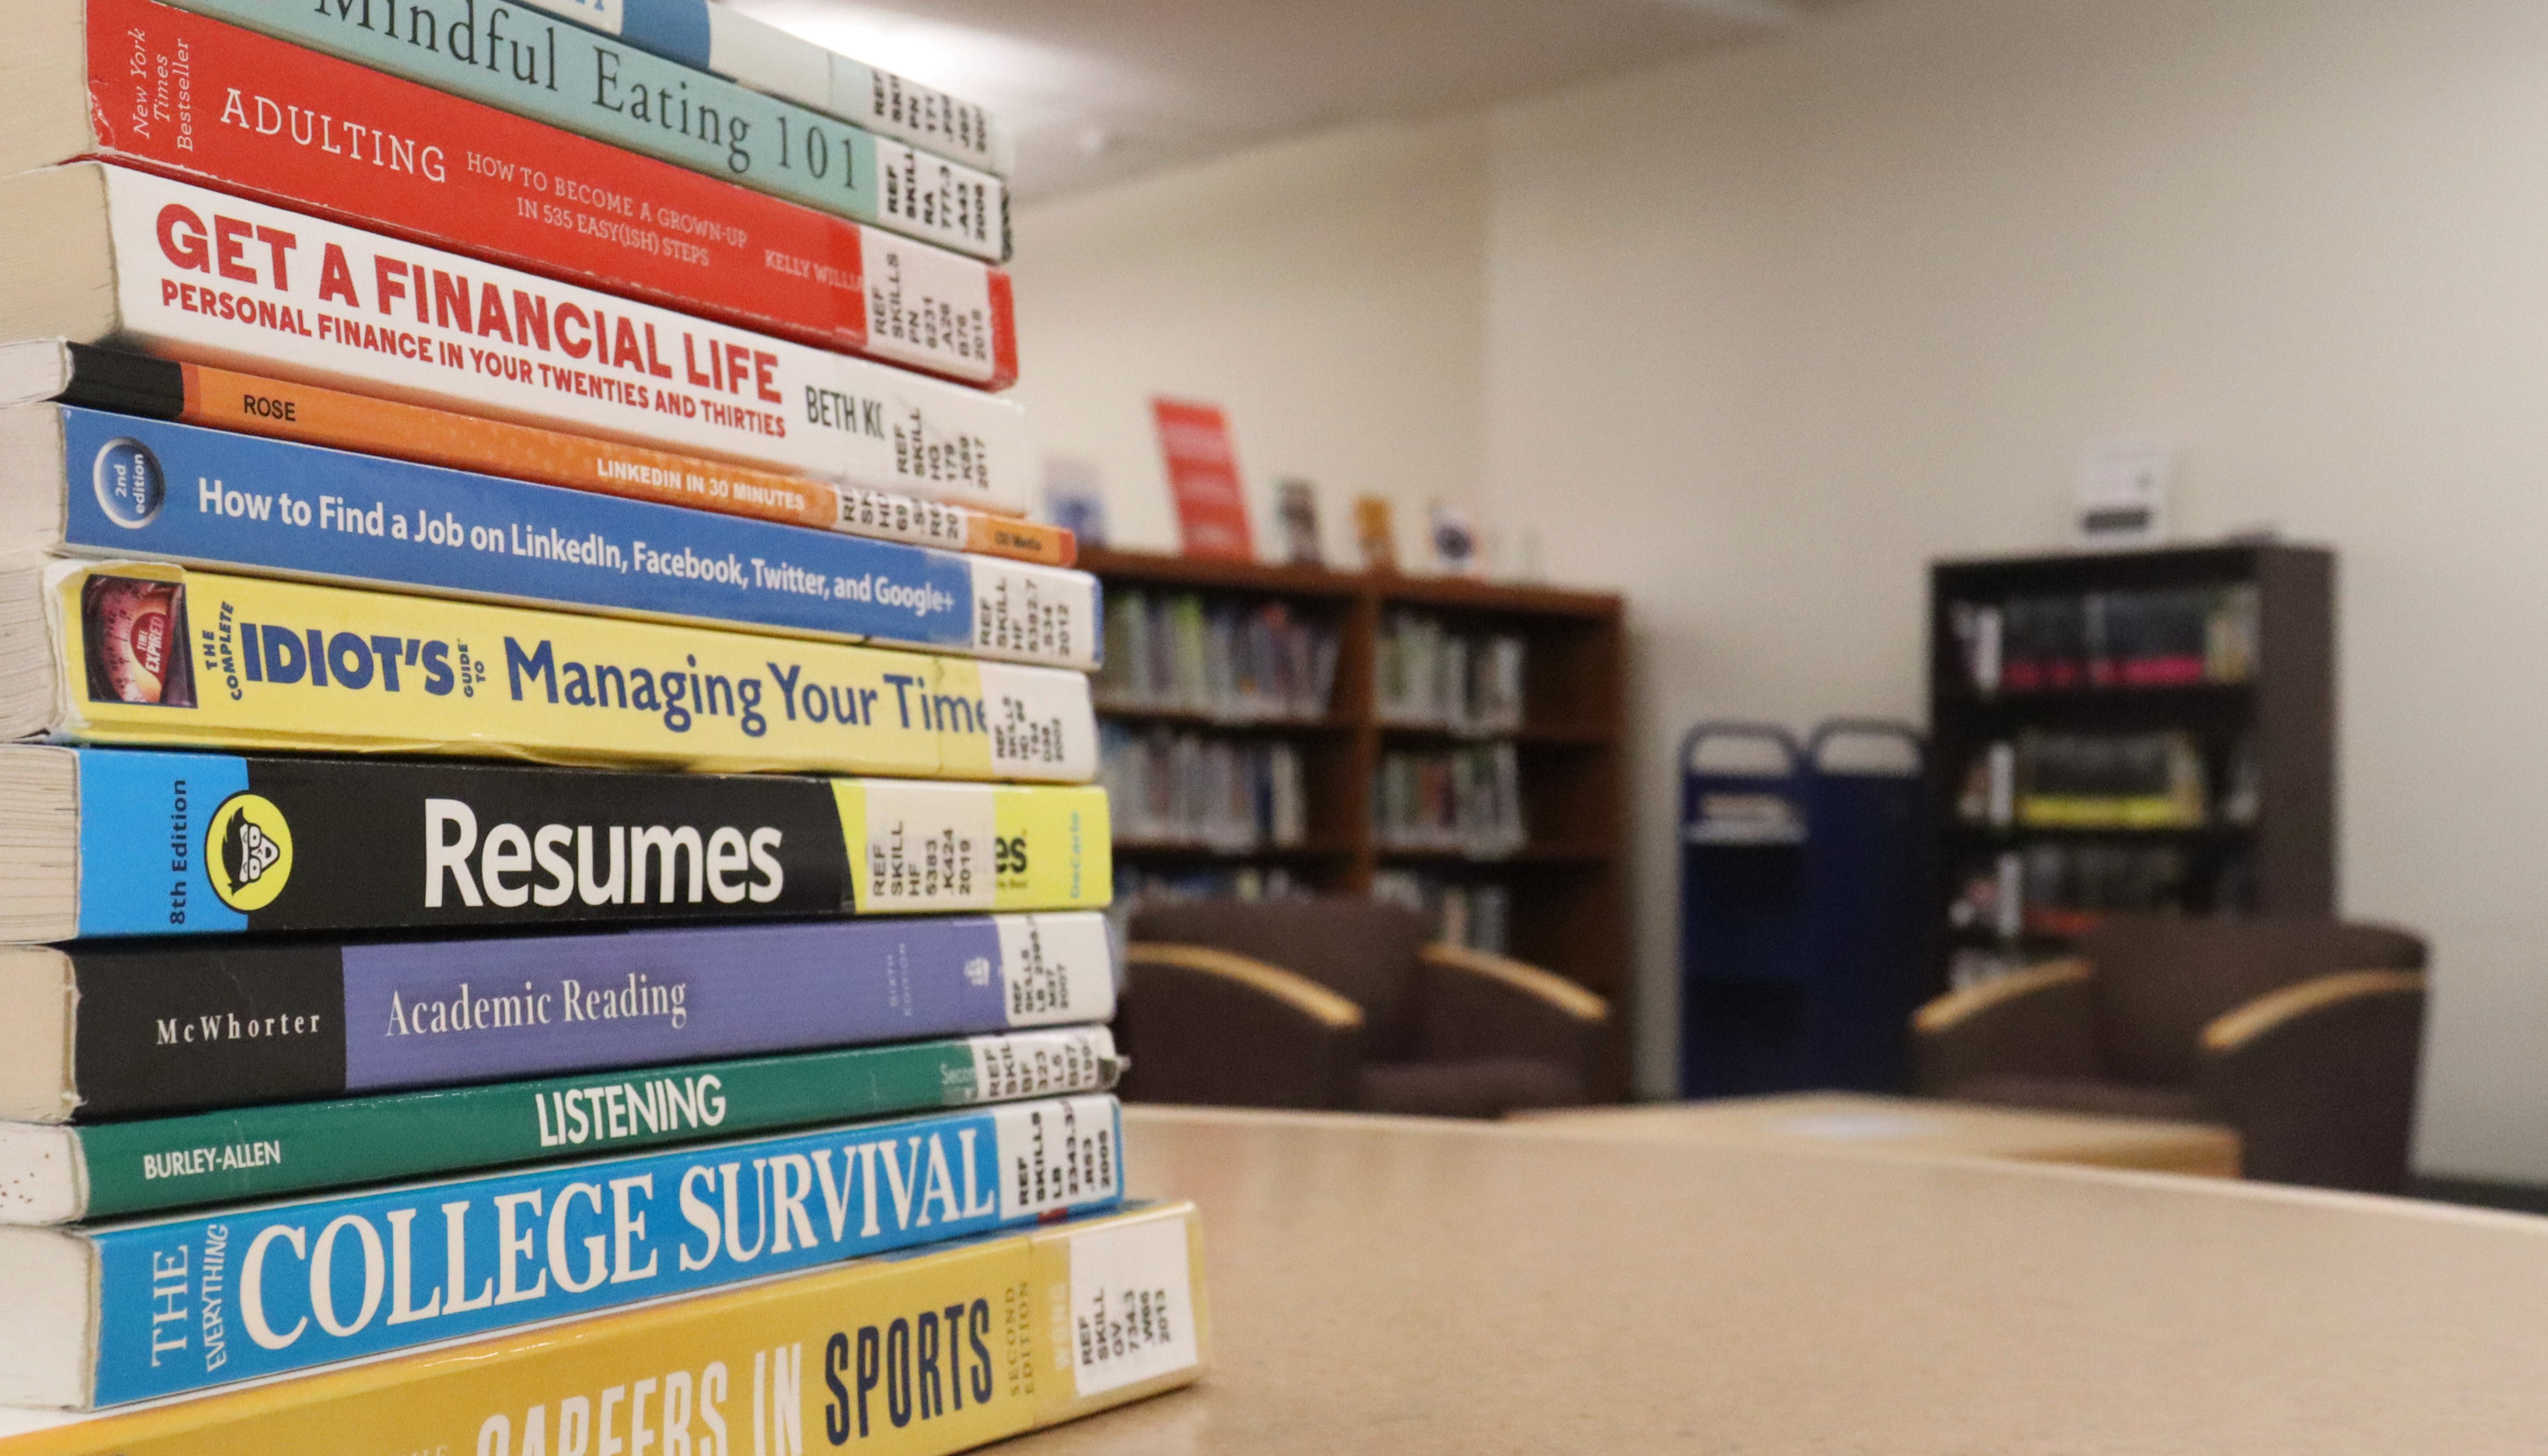 Read Make the most of your time at VCU with the library’s study skills section by VCU Libraries